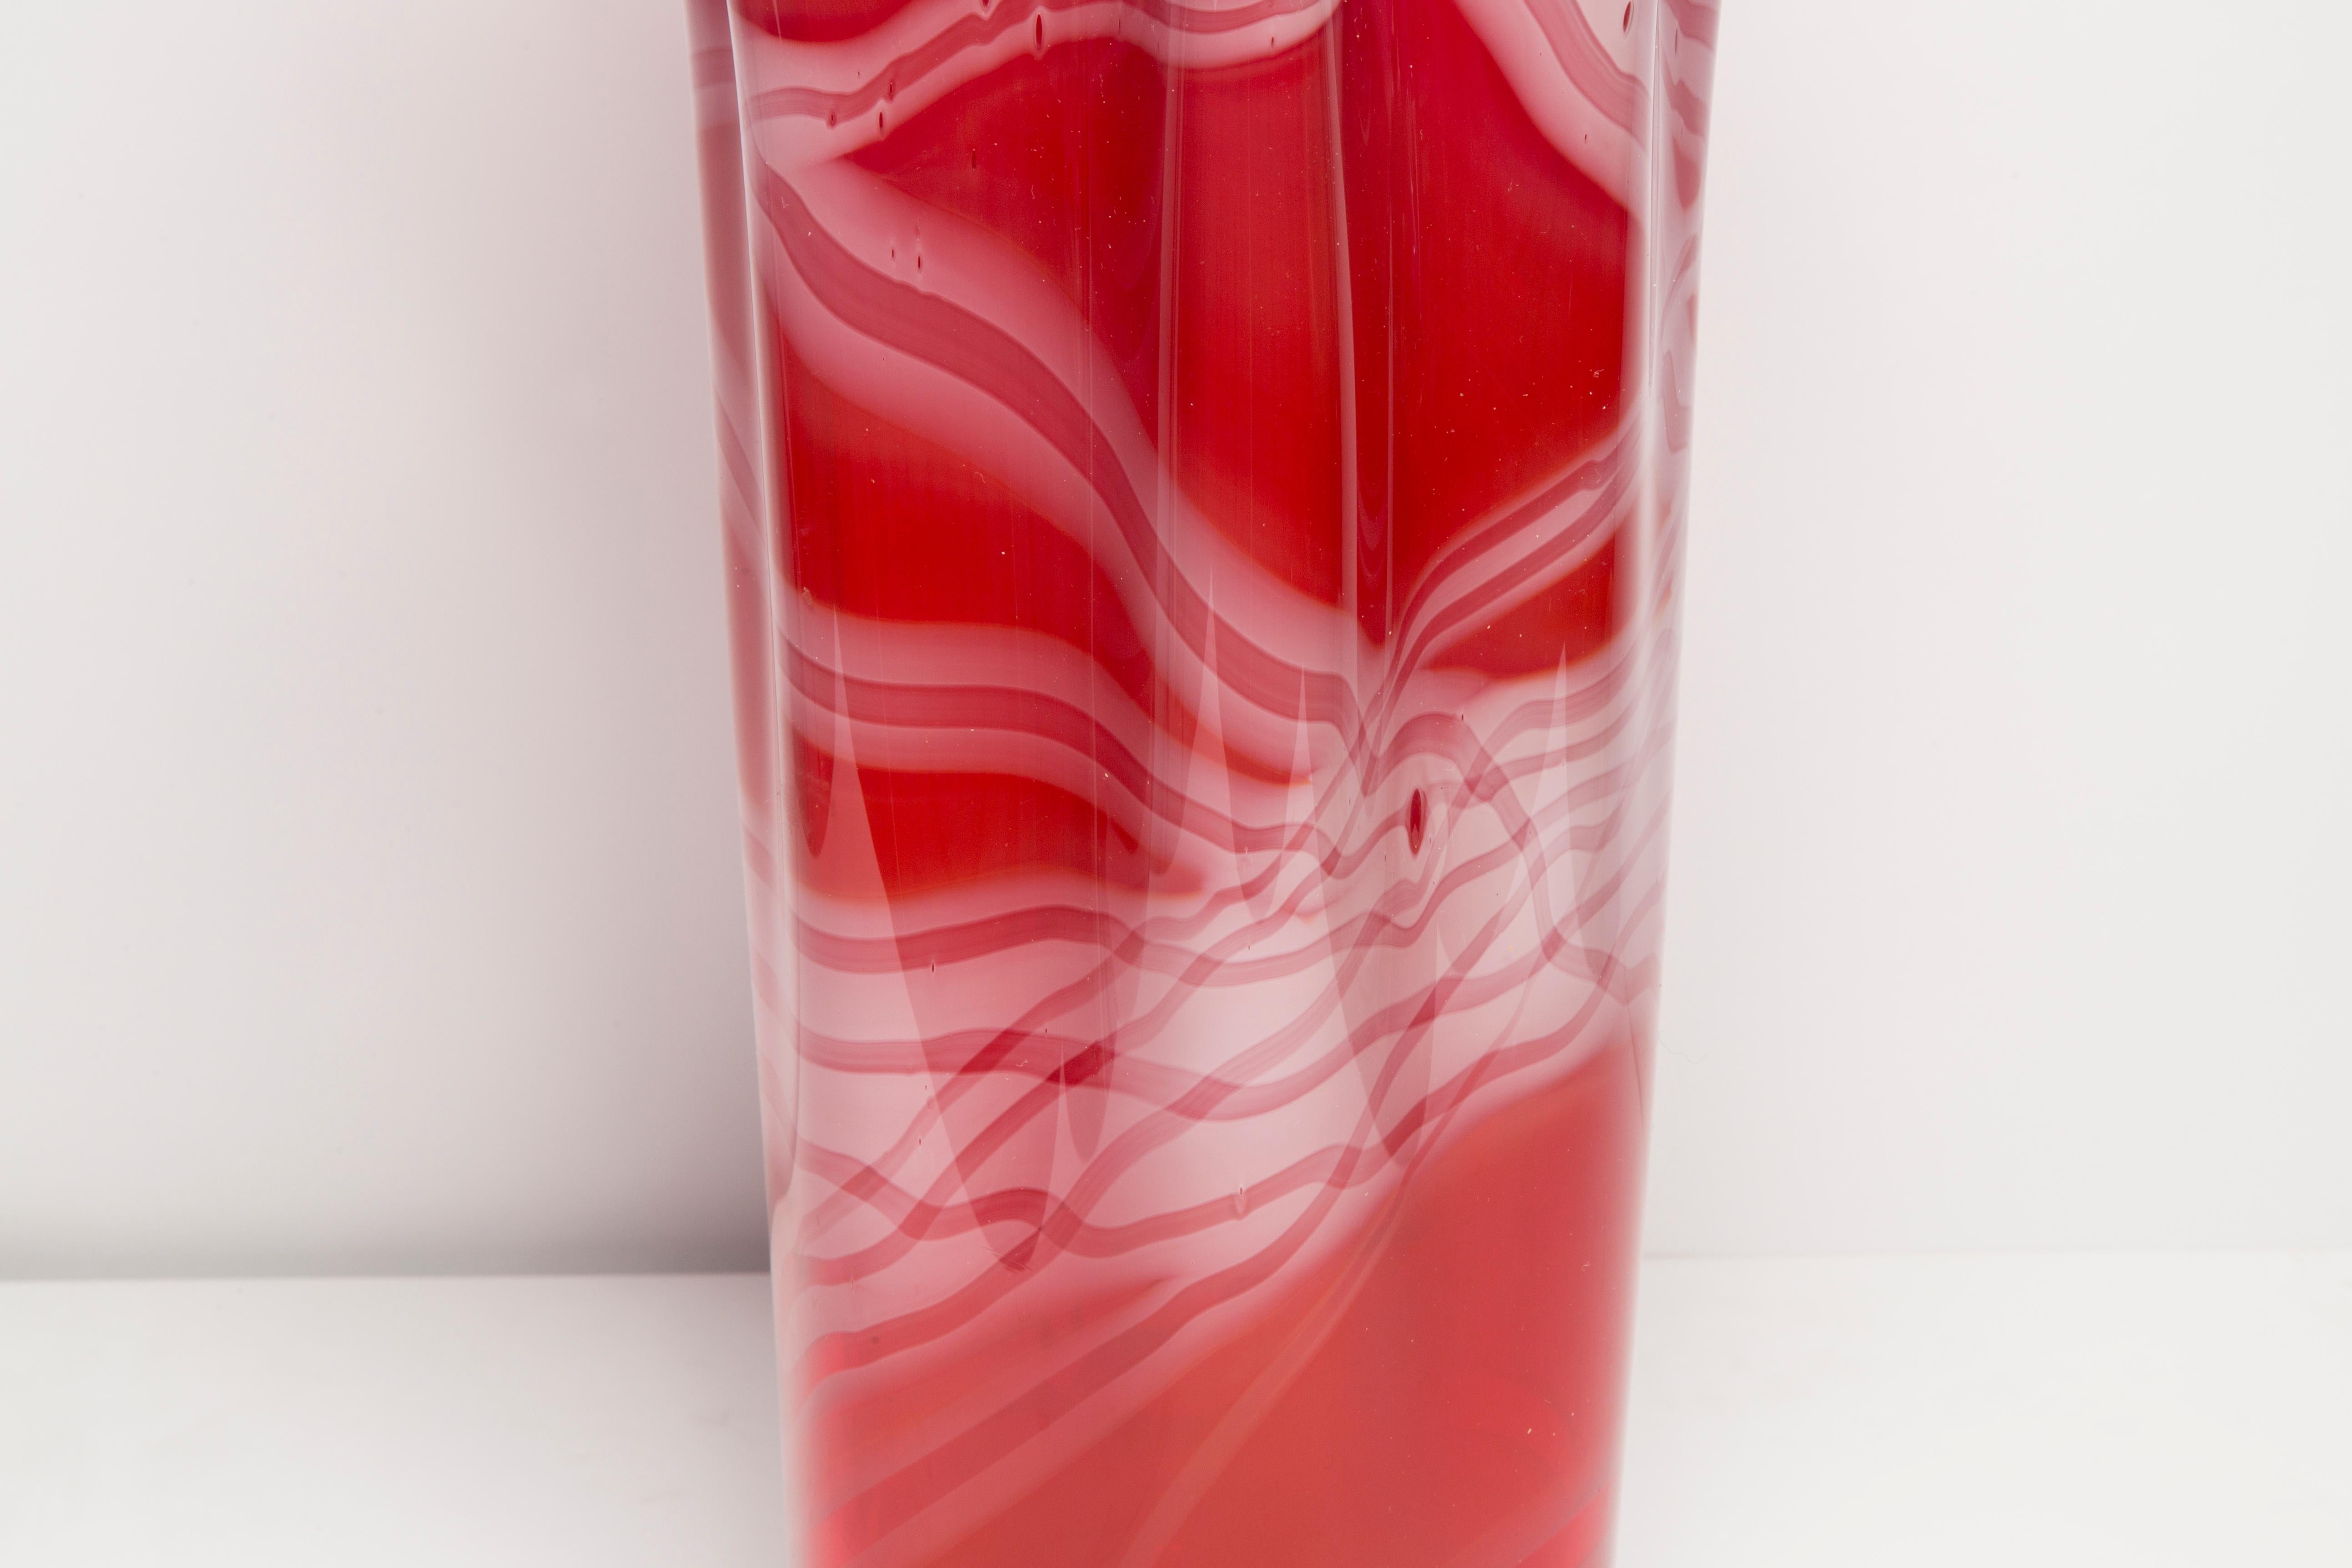 Hand-Carved Mid Century Artistic Glass Big Red Vase, Tarnowiec, Sulczan, Europe, 1970s For Sale